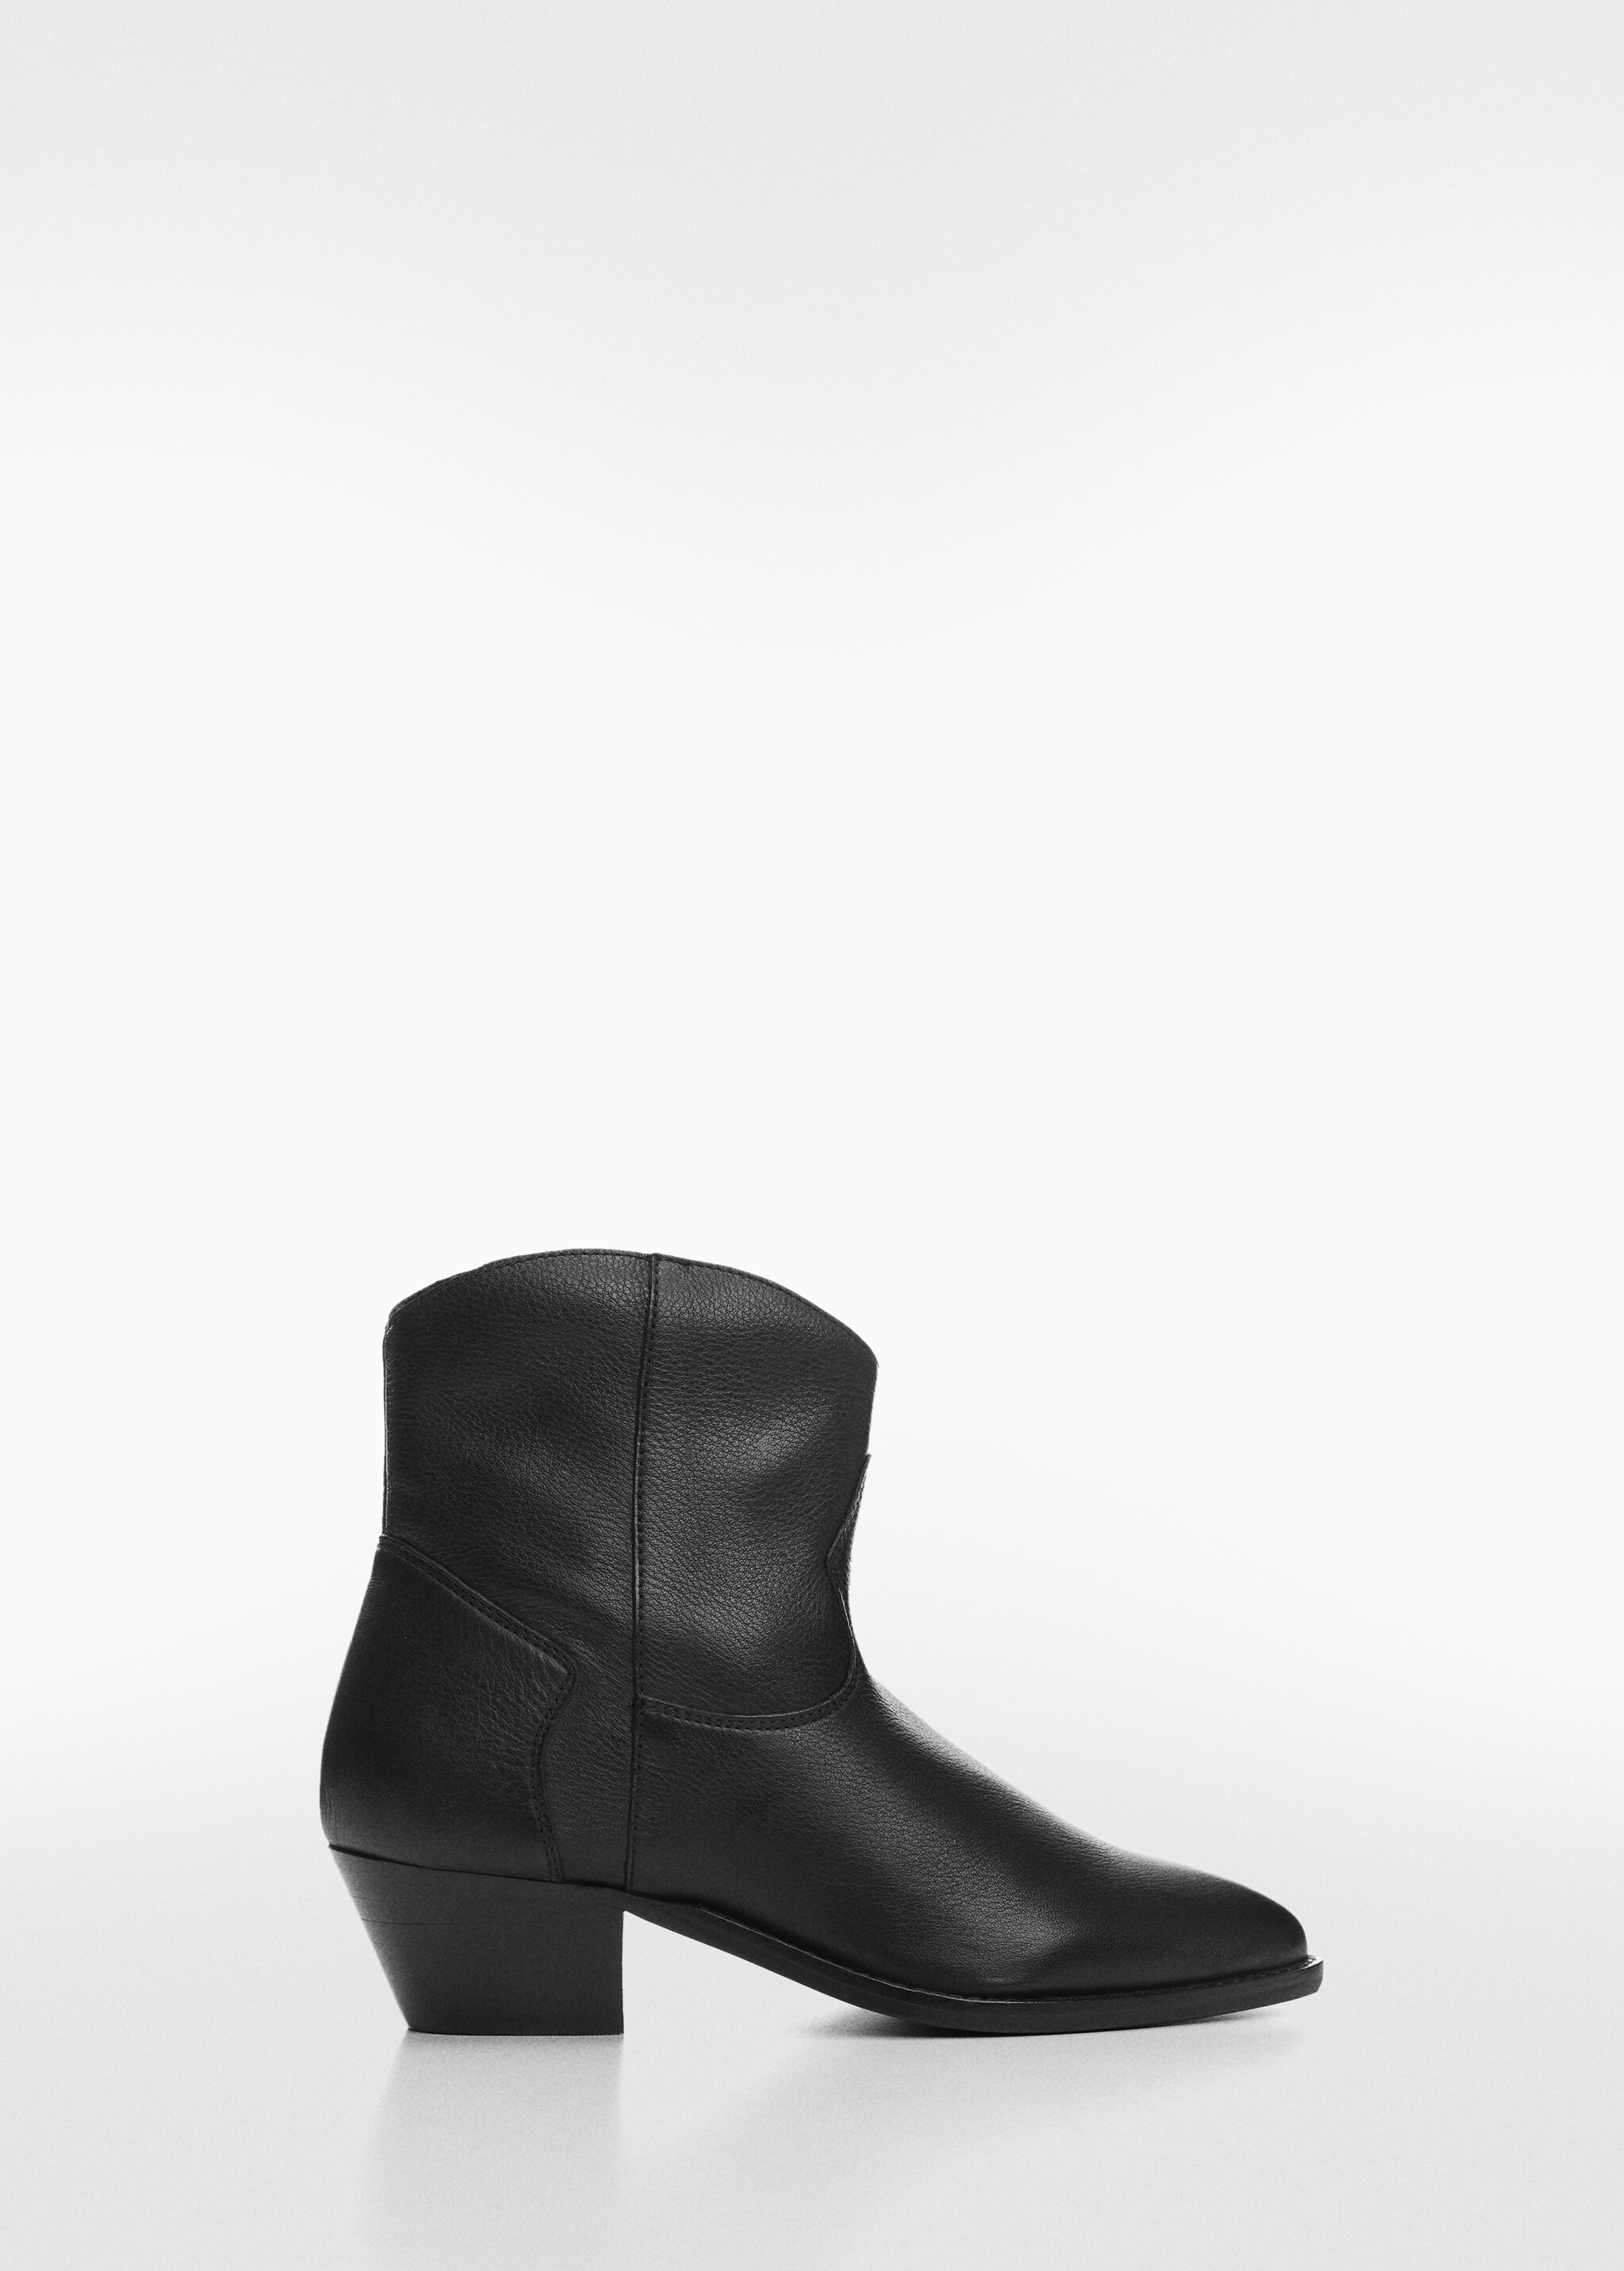 Leather cowboy ankle boots - Article without model